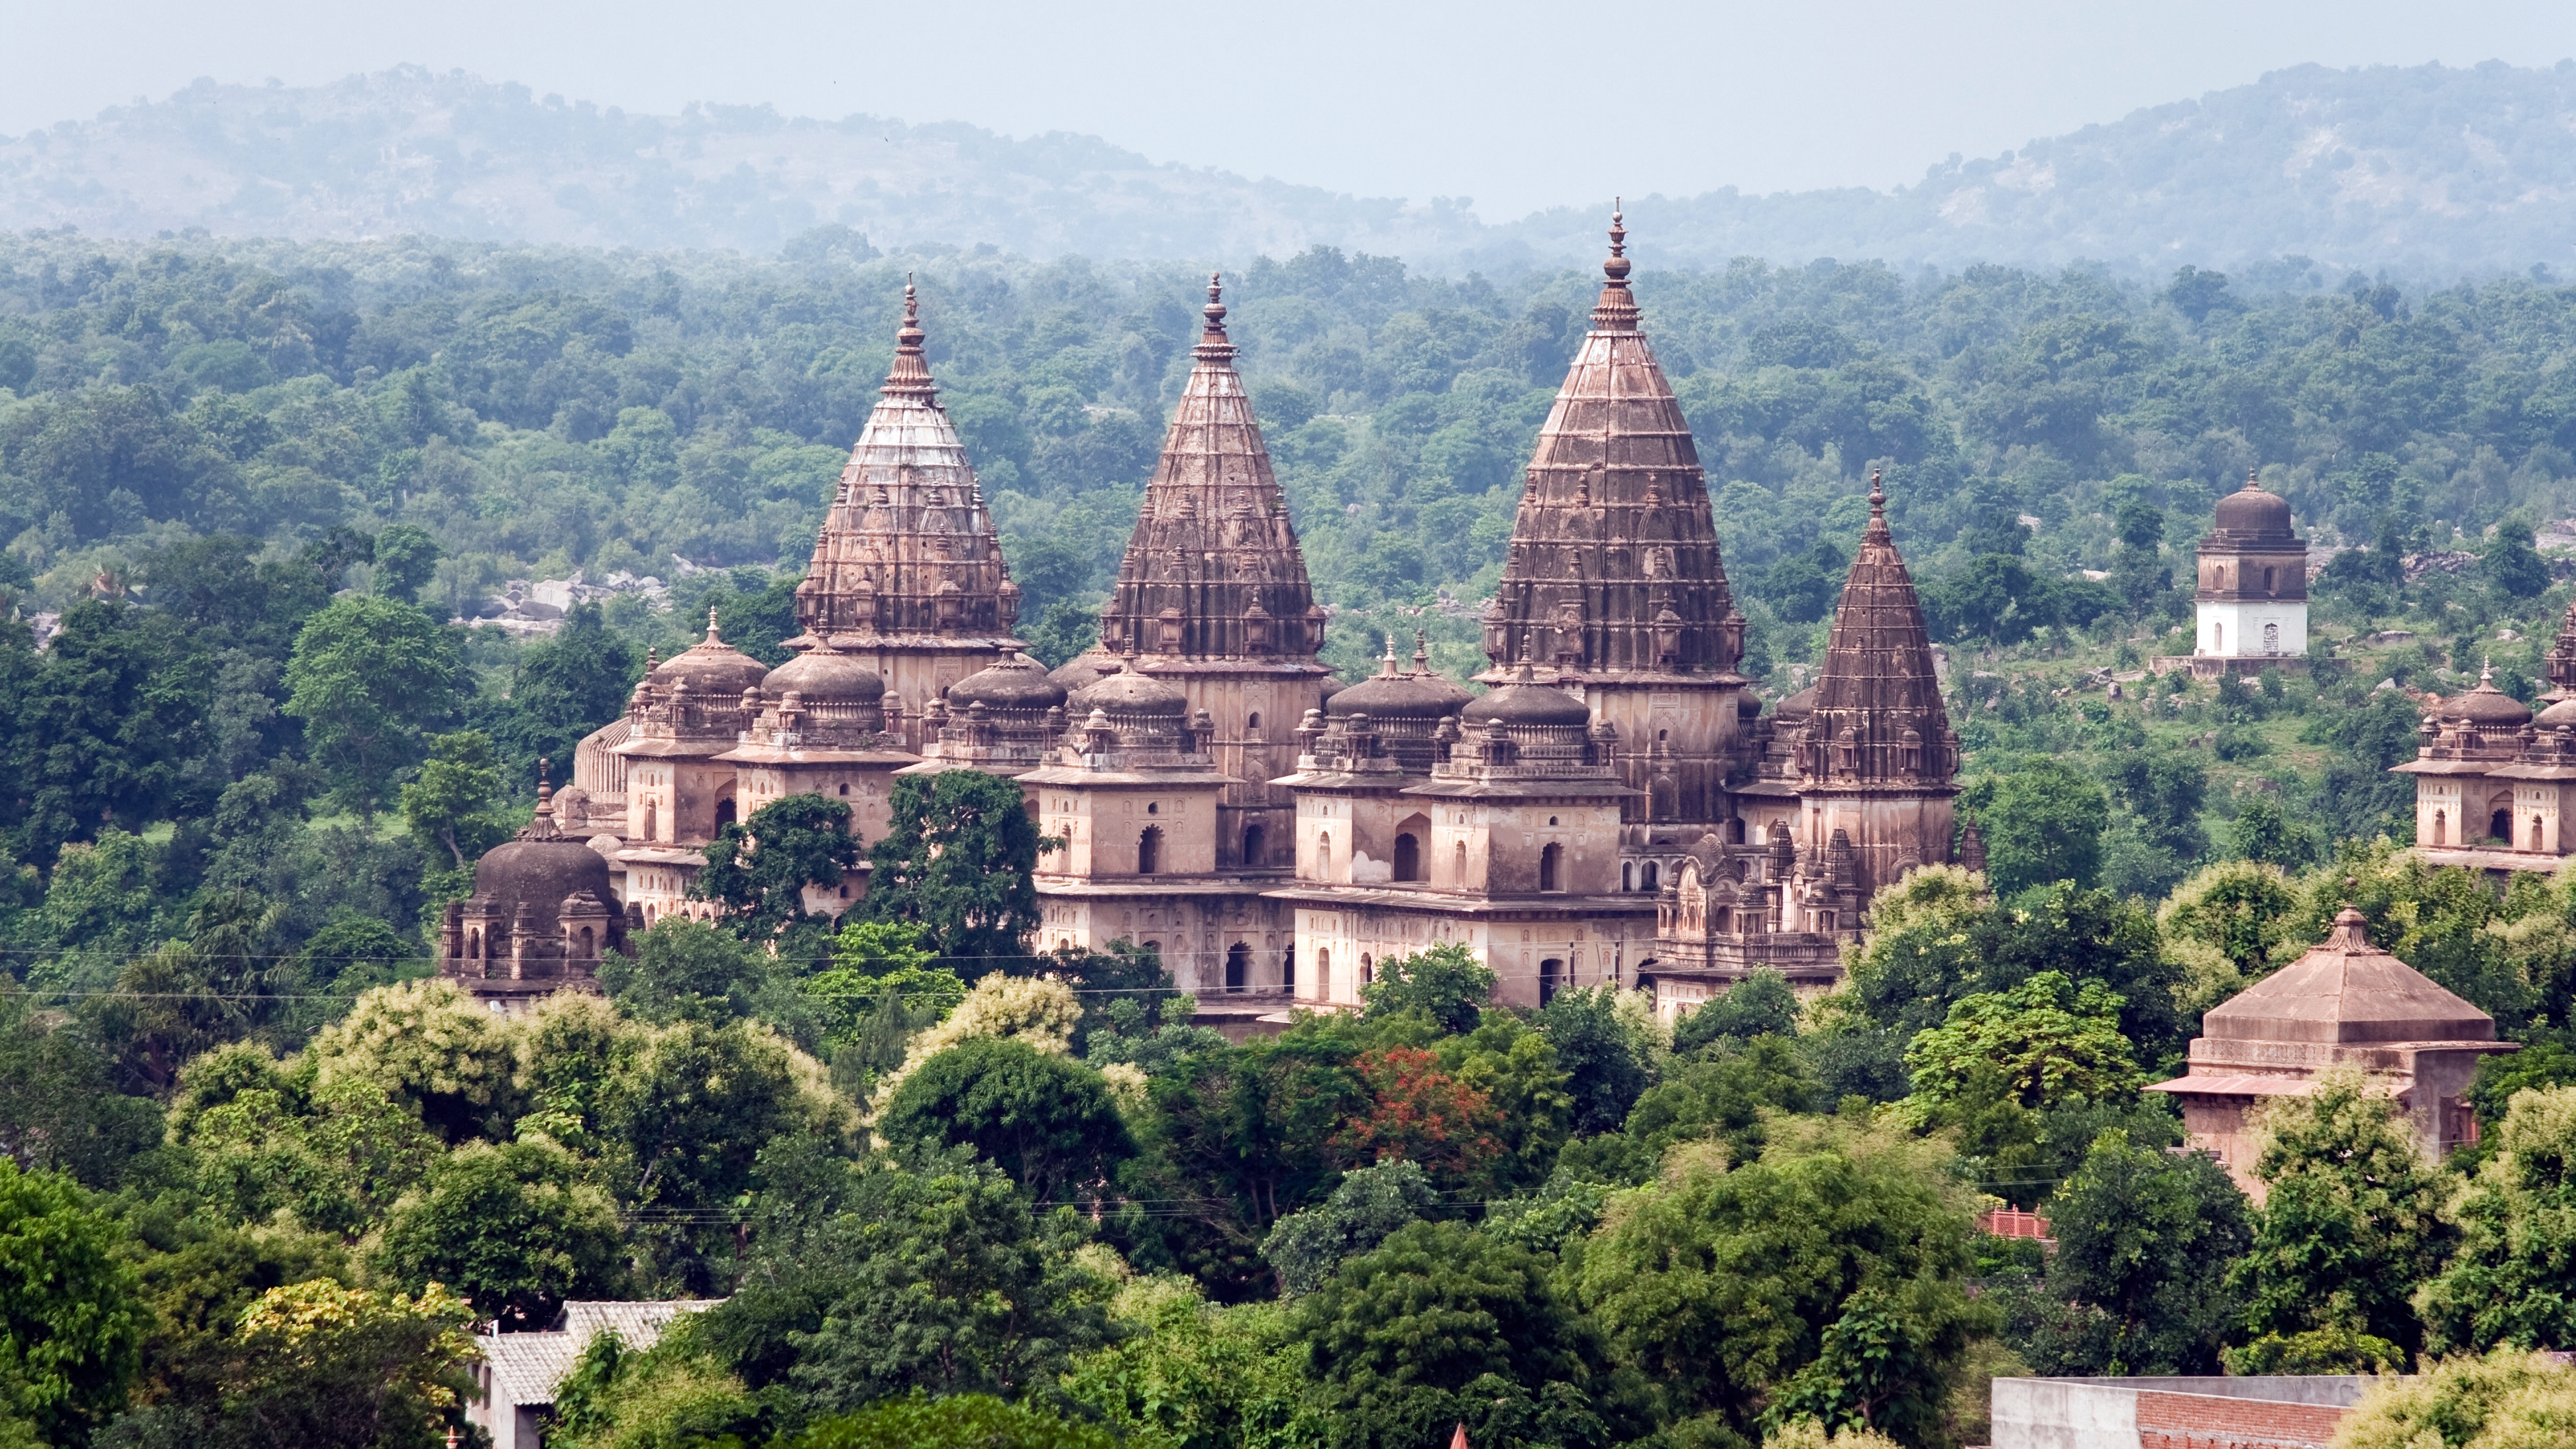 The royal chhatris of Orchha in Madhya Pradesh, India by PEDRE